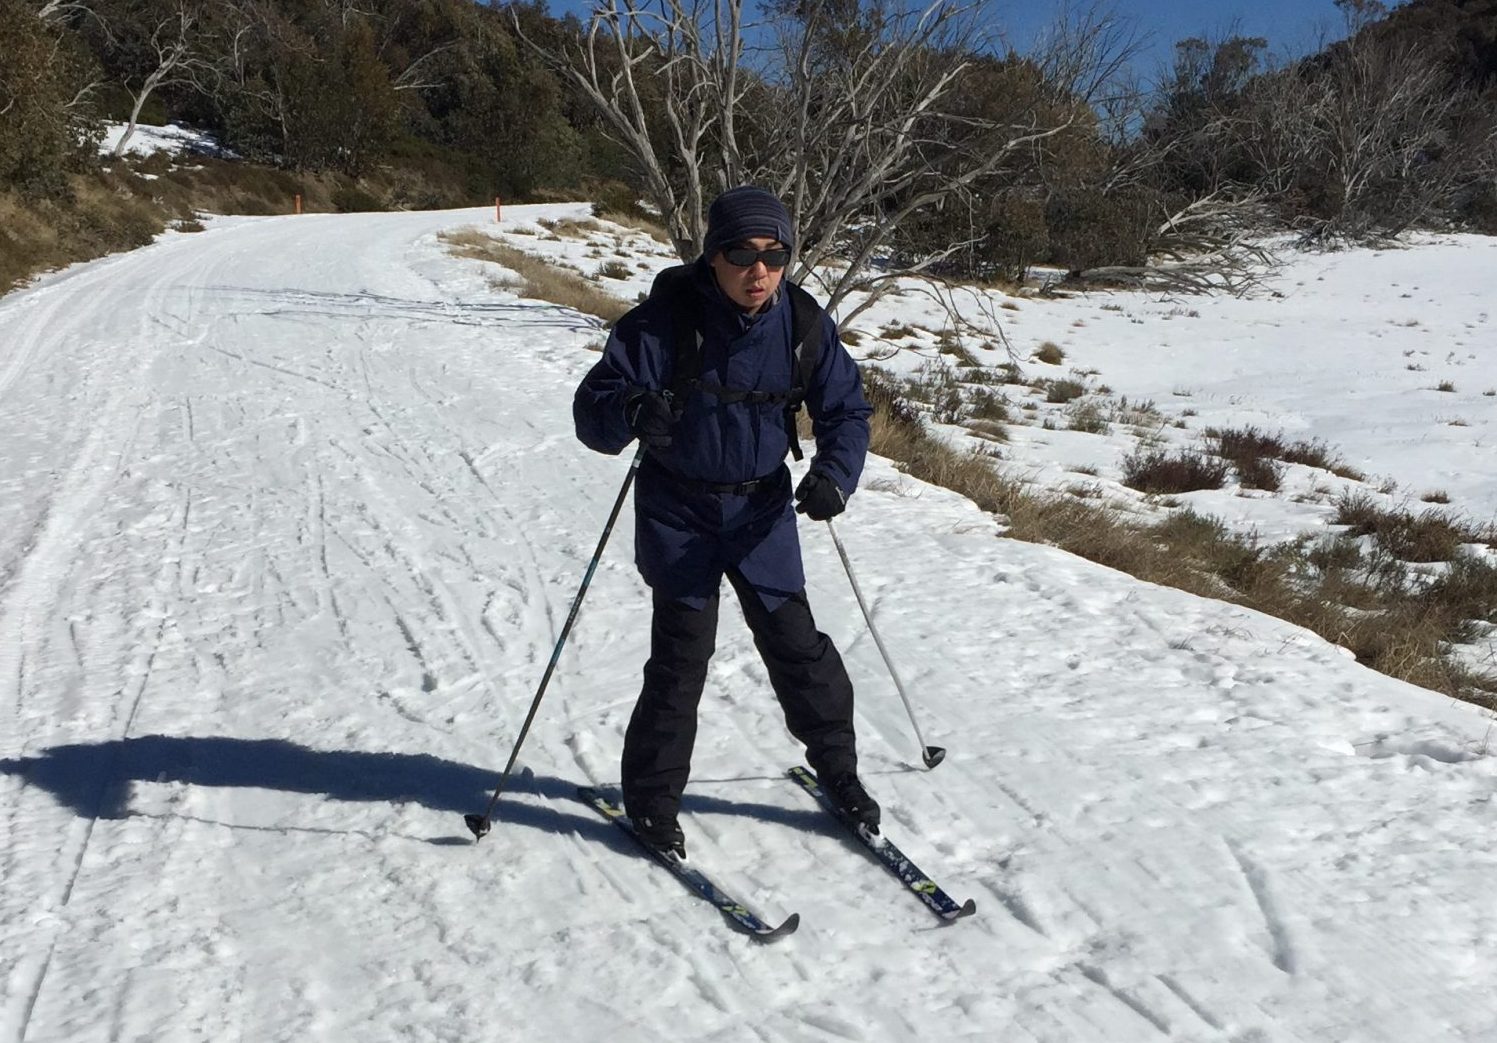 Out Doors Inc participant, Gary Wong, skiing on a program